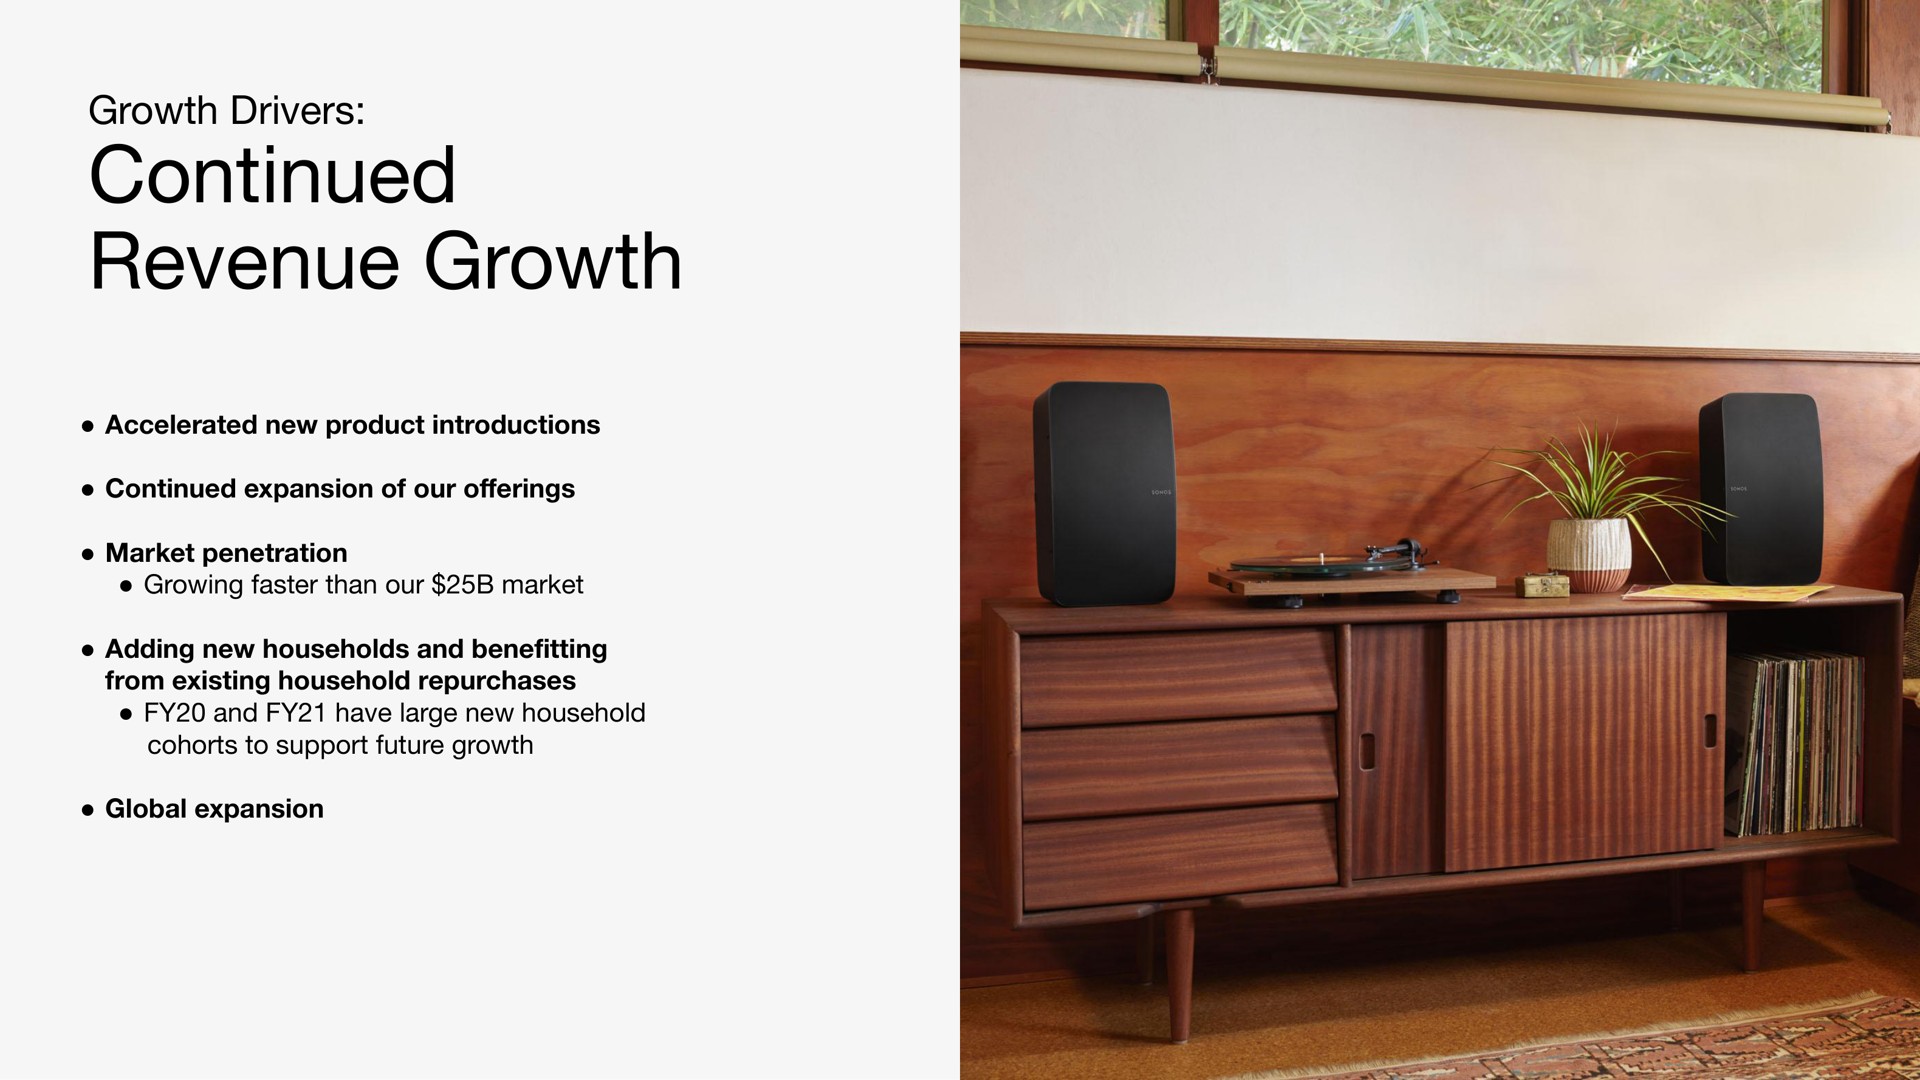 growth drivers continued revenue growth accelerated new product introductions continued expansion of our market penetration growing faster than our market adding new households and bene from existing household repurchases and have large new household cohorts to support future growth global expansion | Sonos